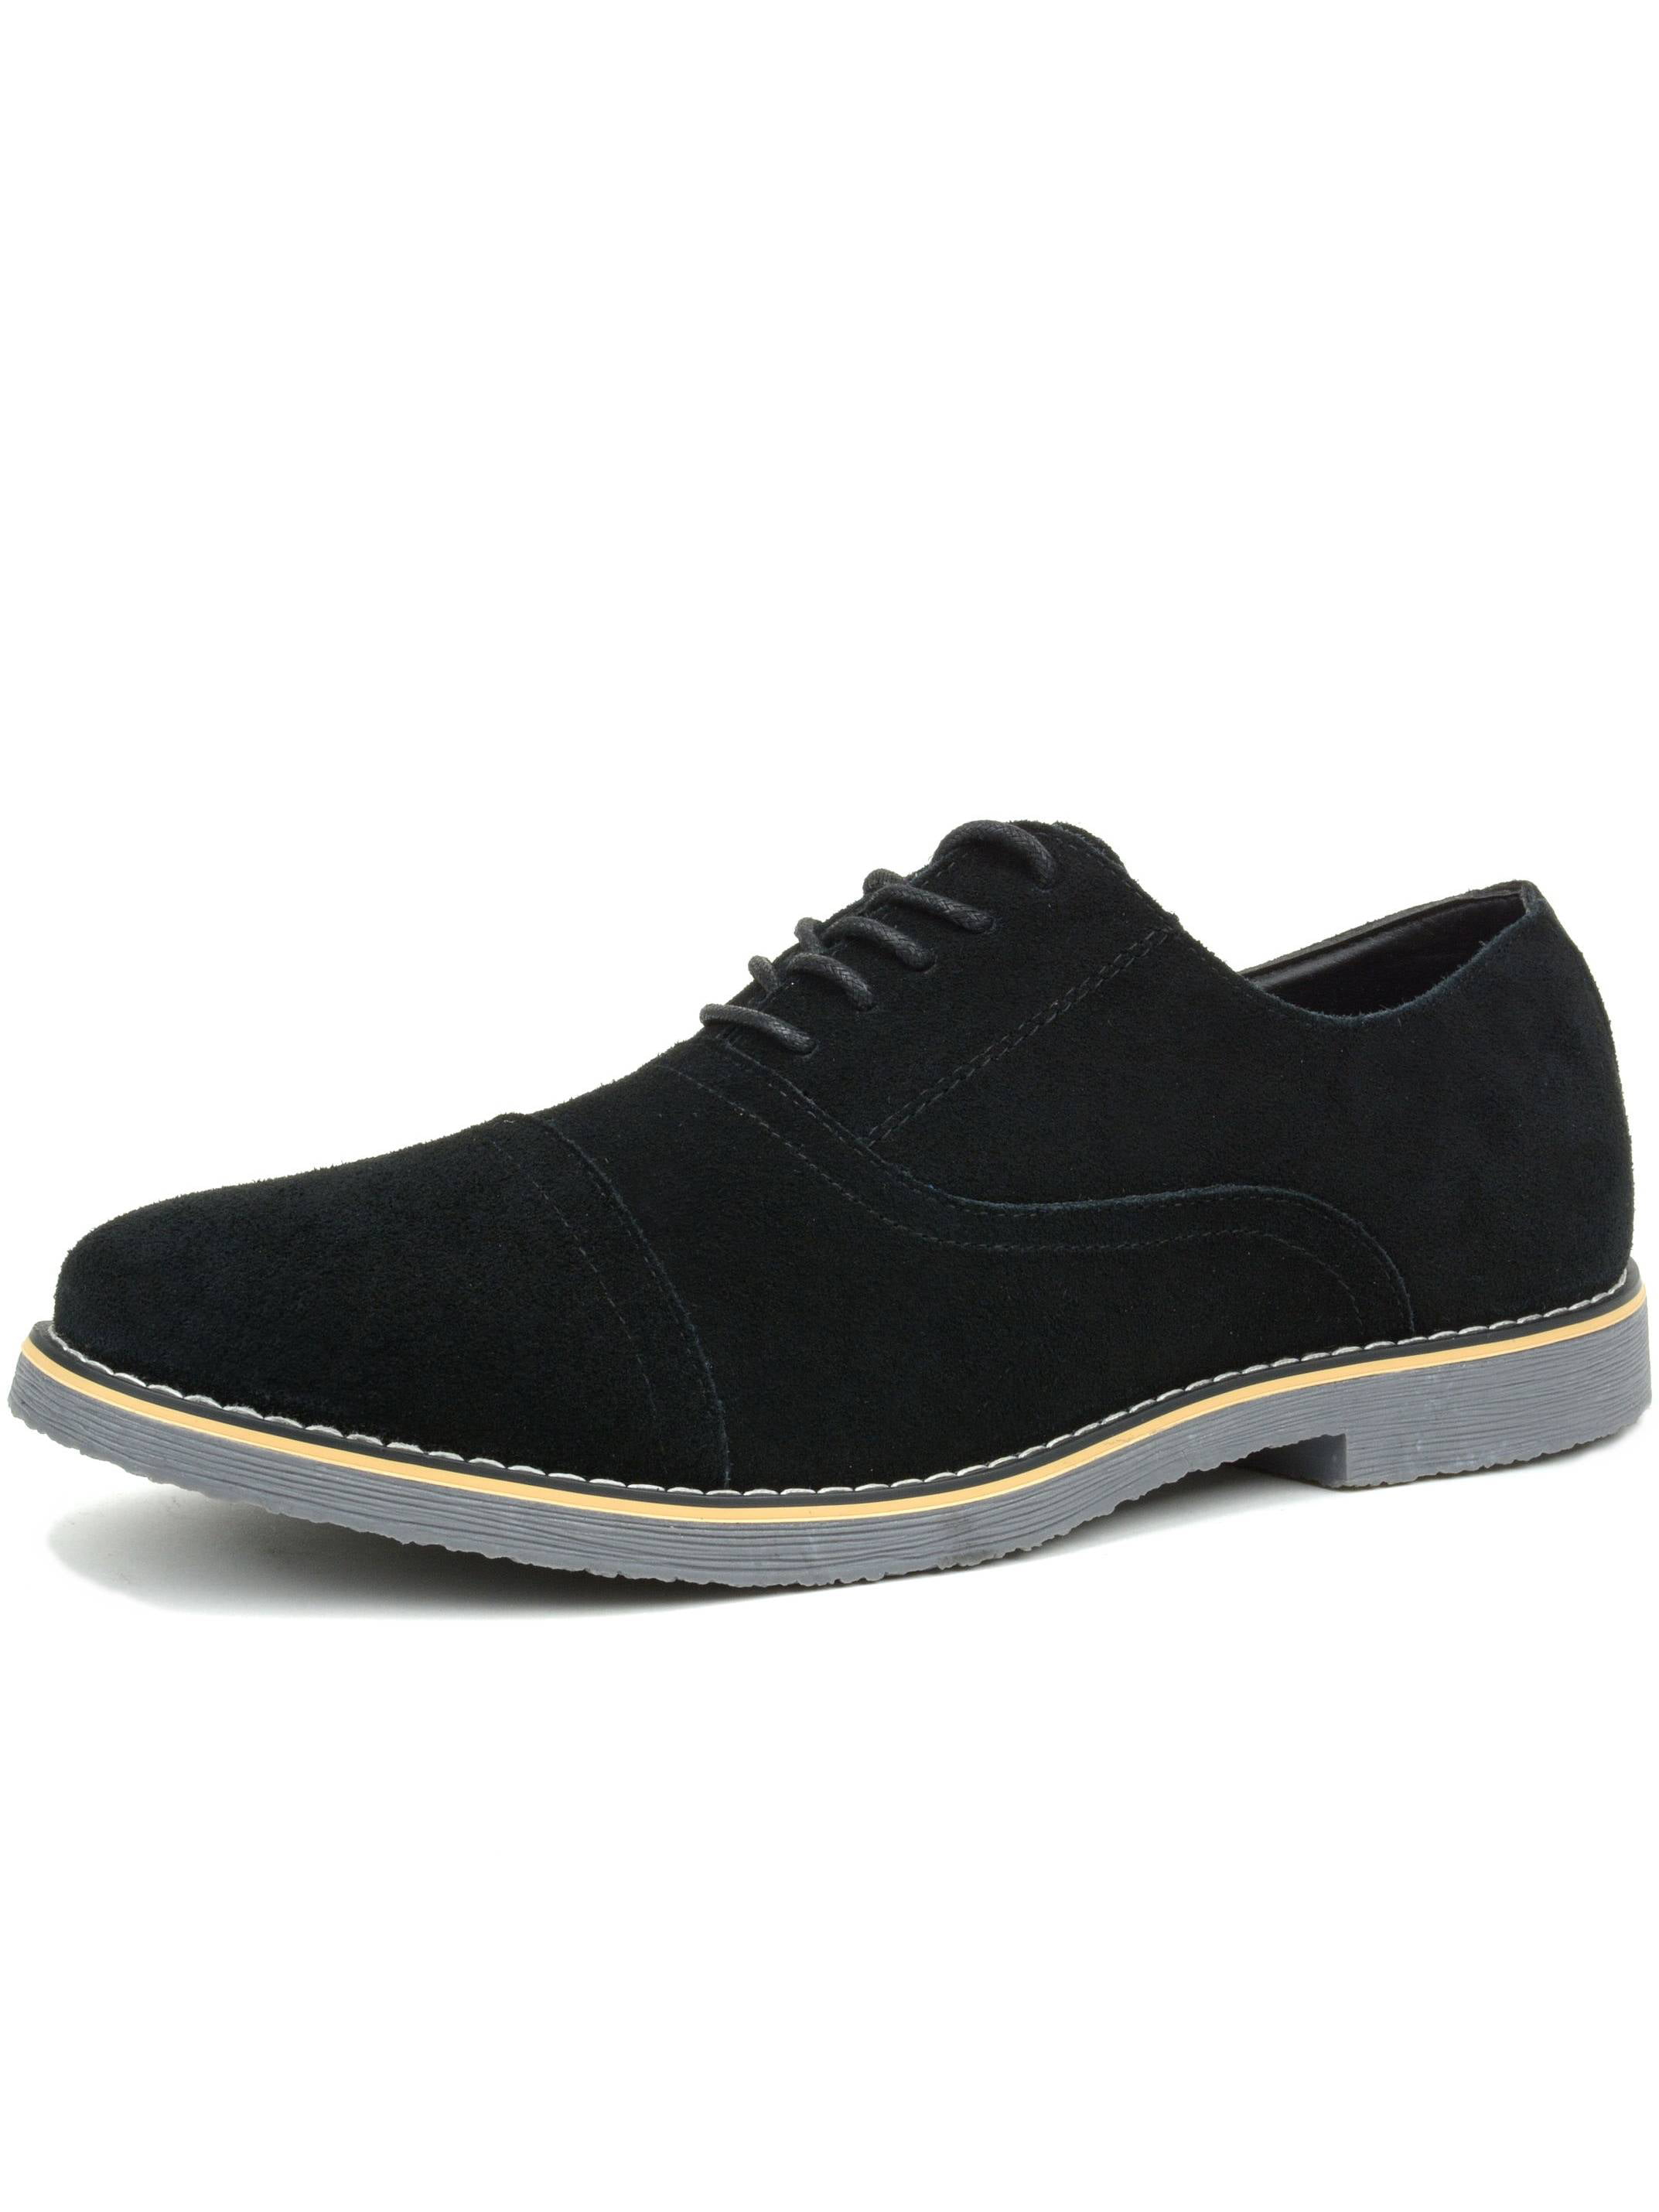 relaxed fit walson oxford